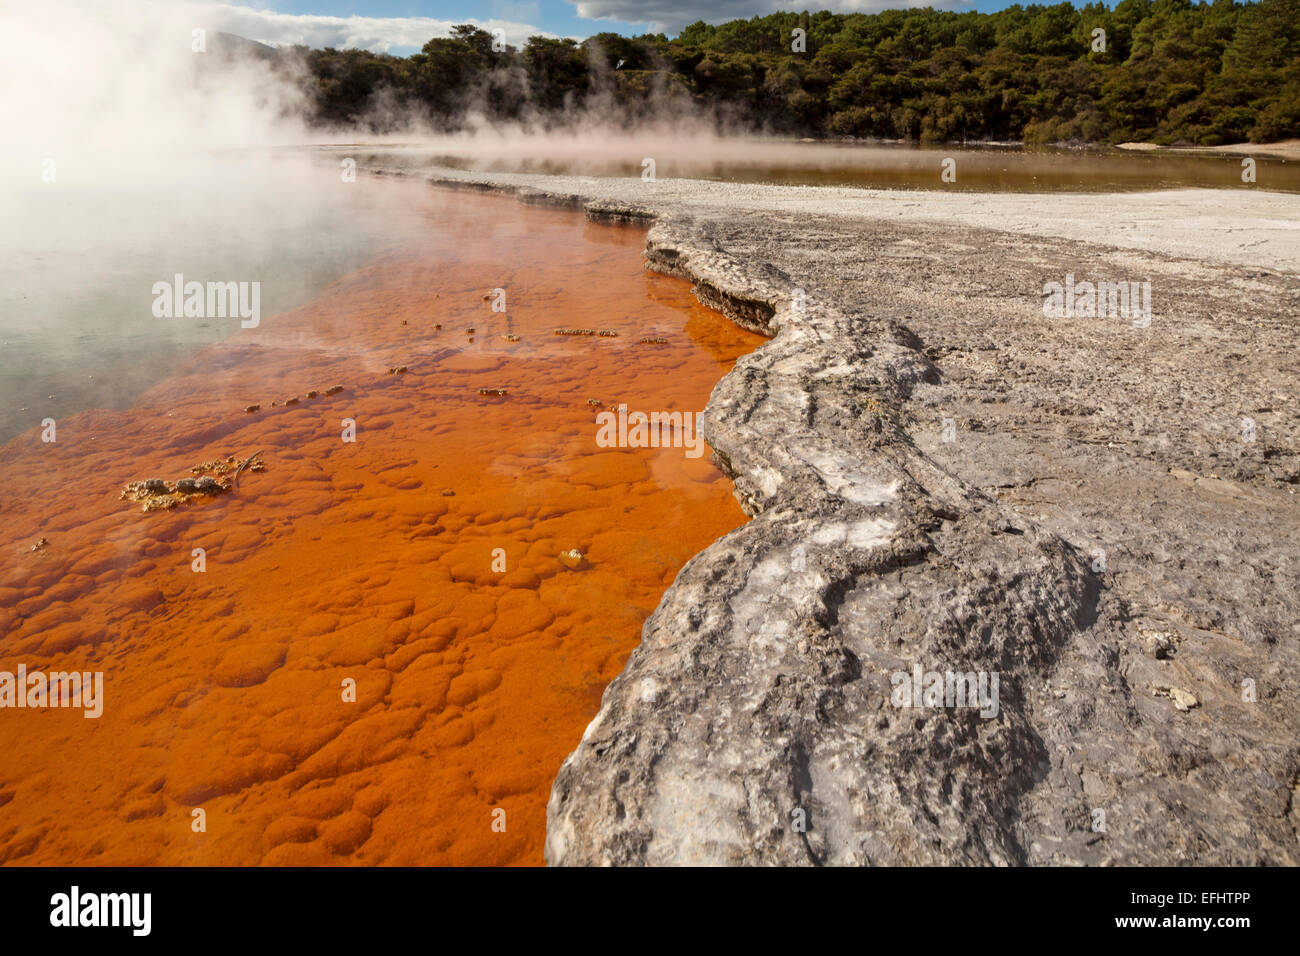 Champagne Pool, geothermal pool with carbon-dioxide bubbles, Waio-tapu crater lake, near Rotorua, North Island, New Zealand Stock Photo